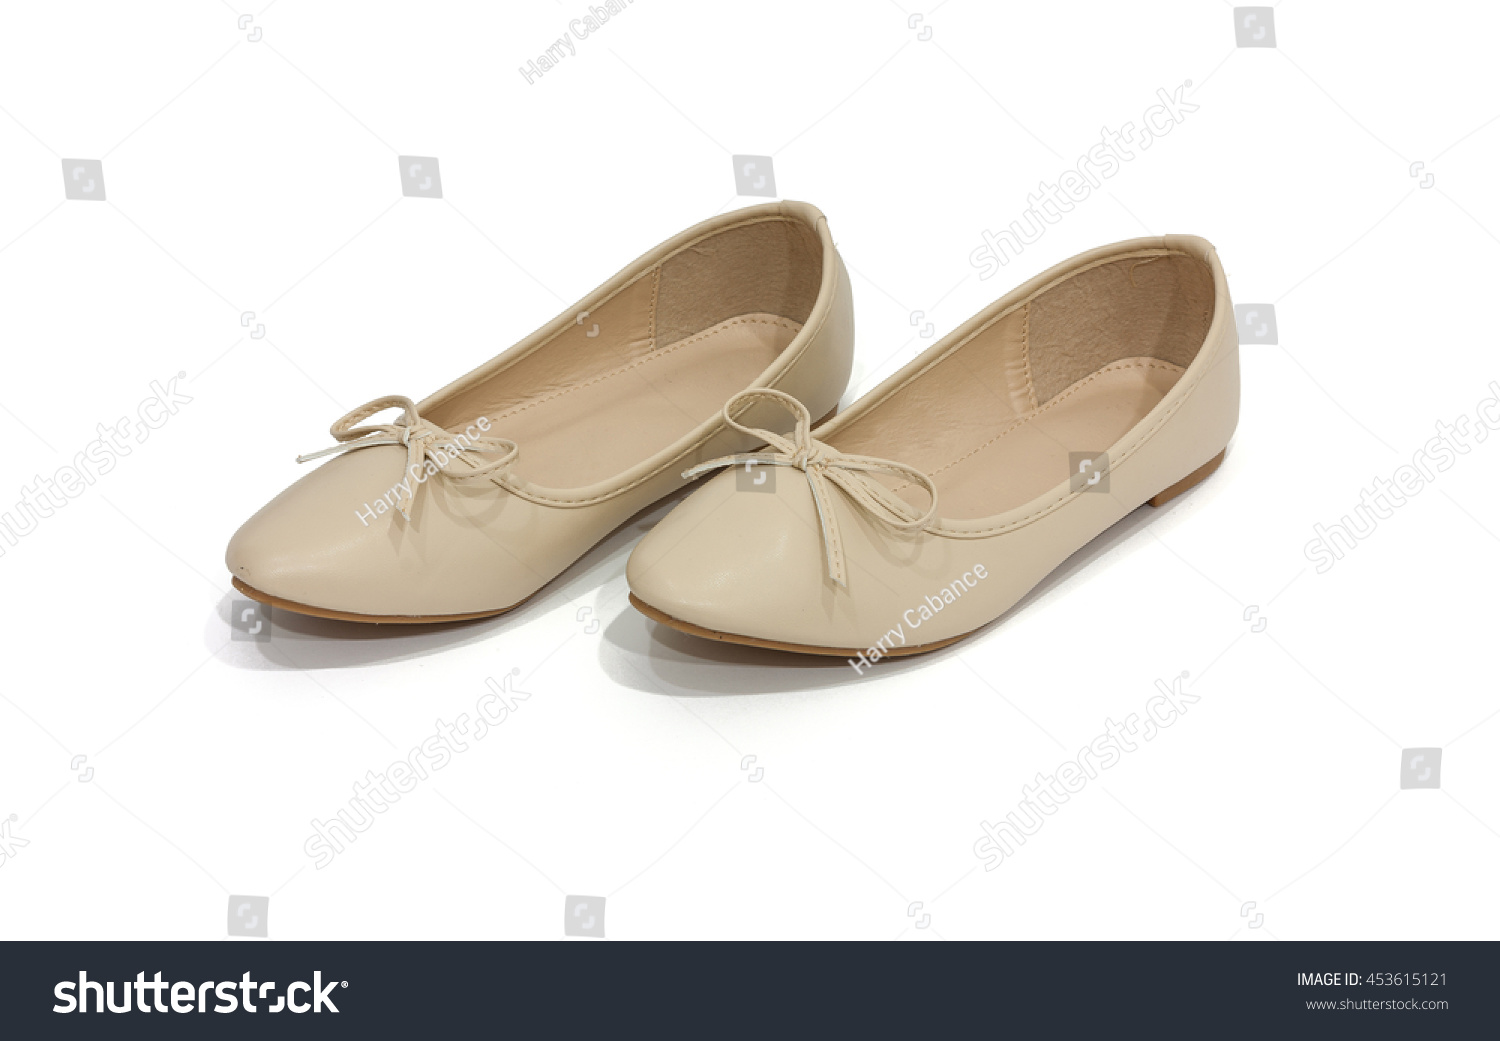 cream colored flat shoes